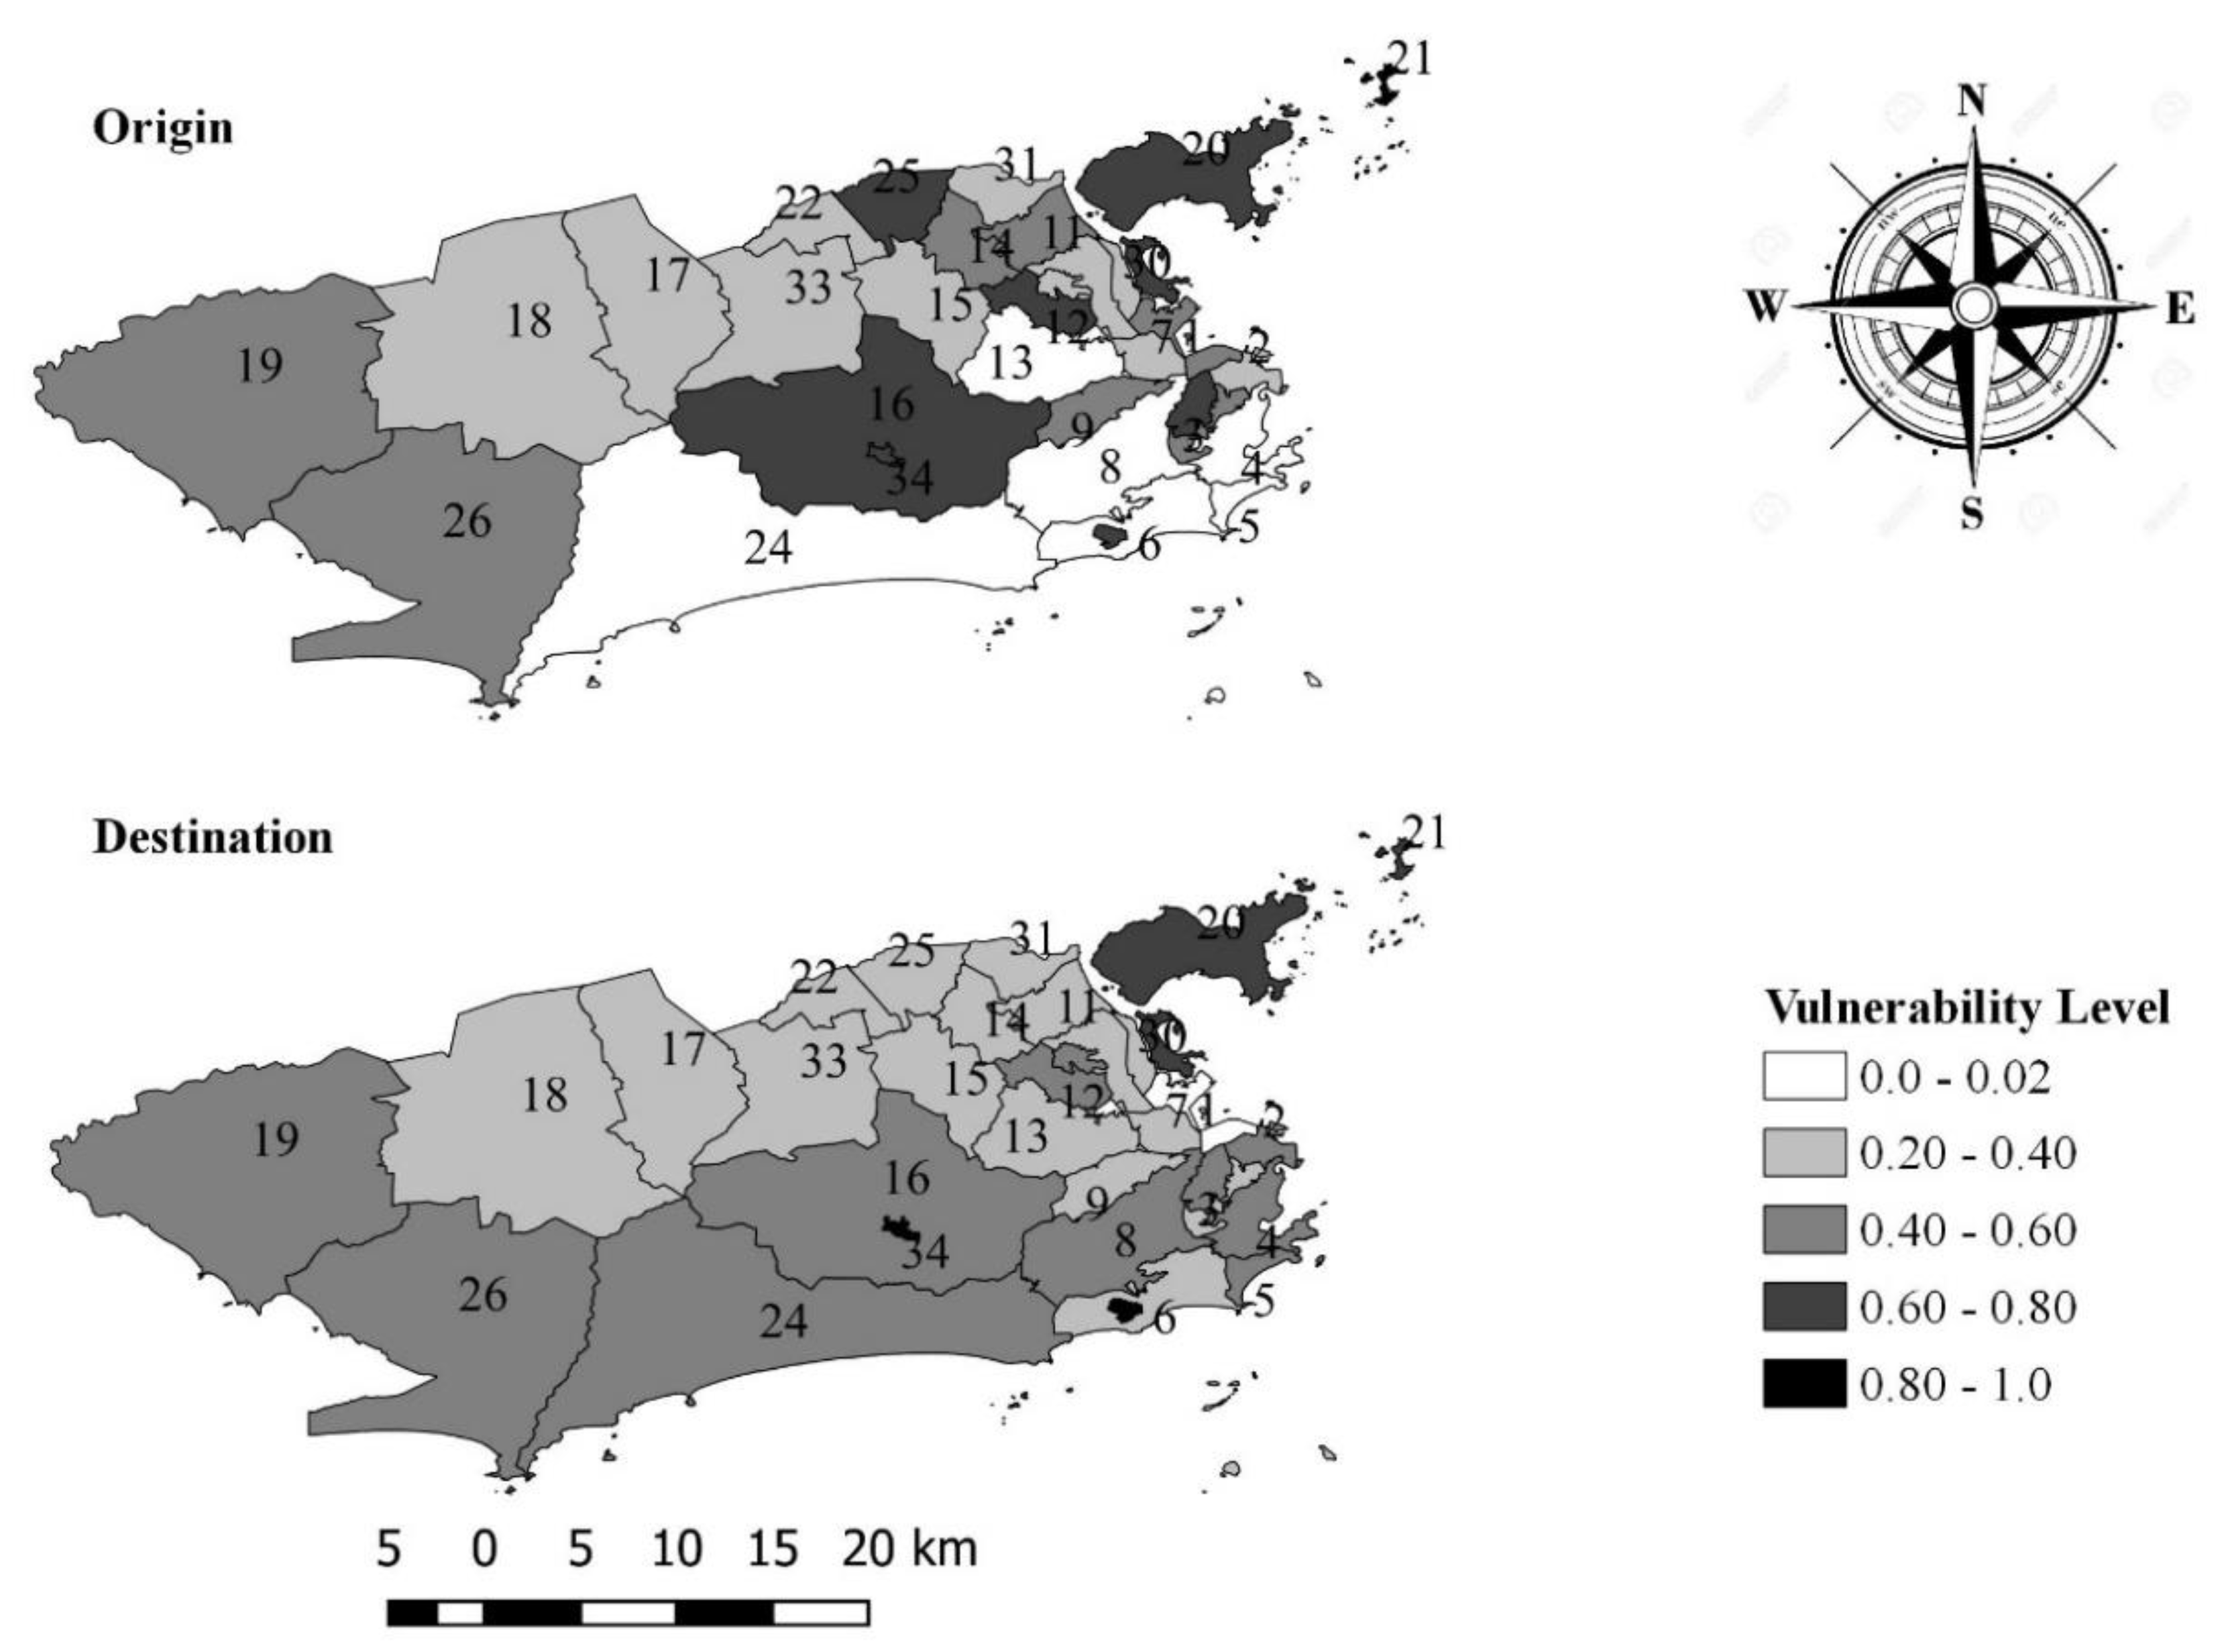 Sustainability Free Full Text Resilience And Vulnerability Of Public Transportation Fare Systems The Case Of The City Of Rio De Janeiro Brazil Html